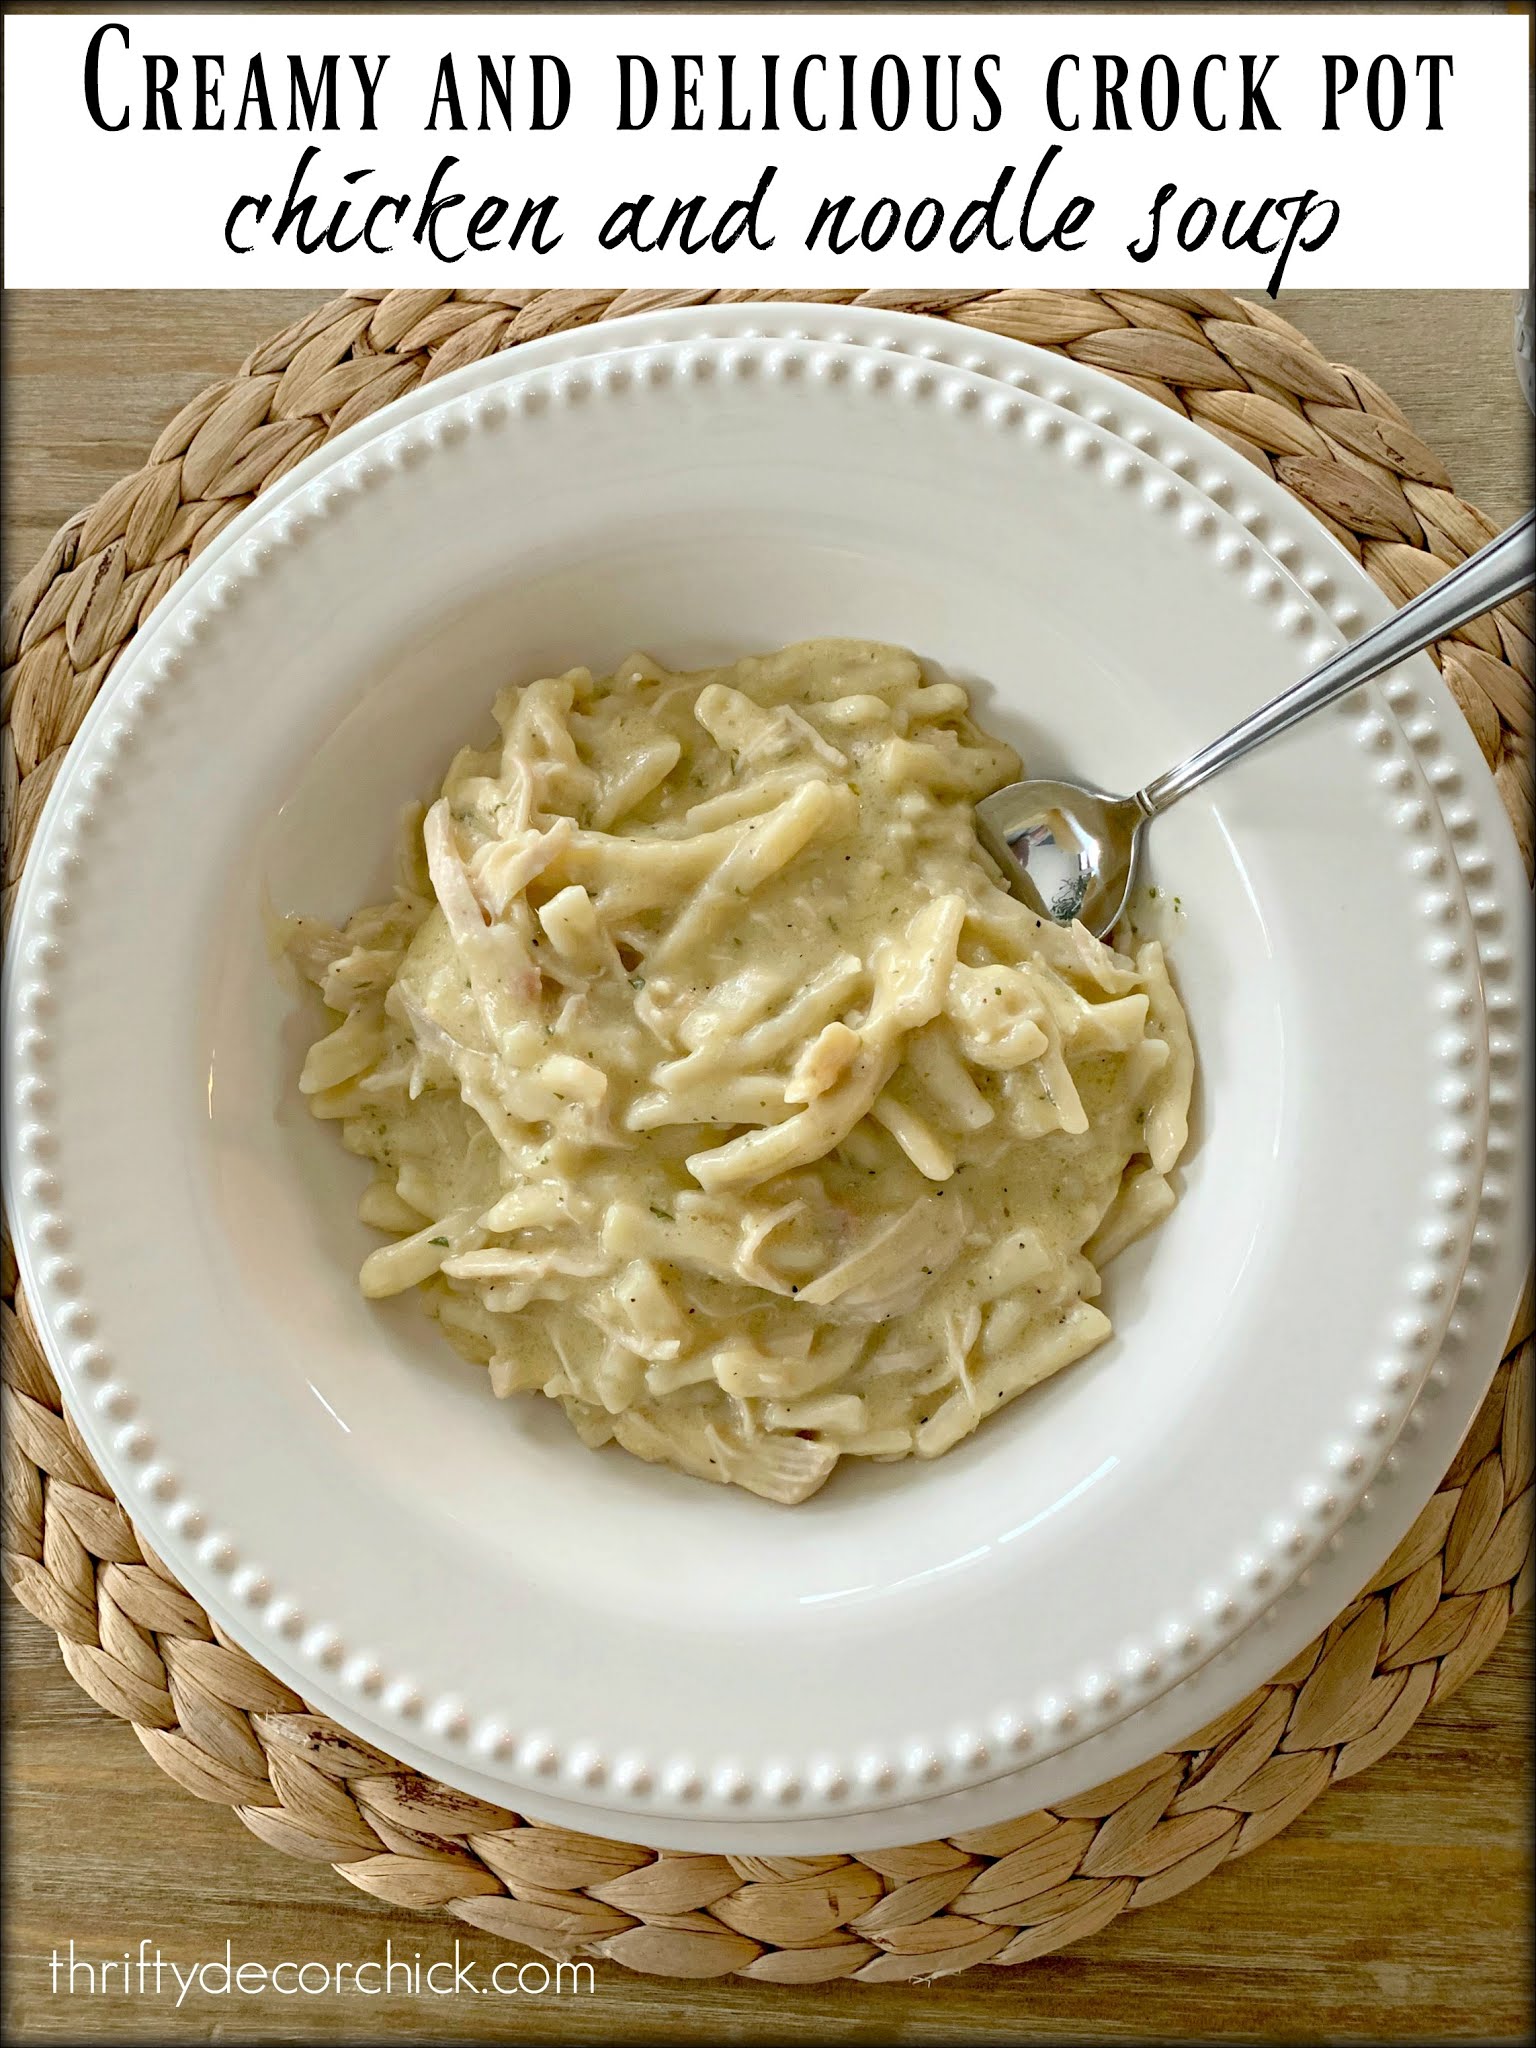 thick crock pot chicken and noodle soup